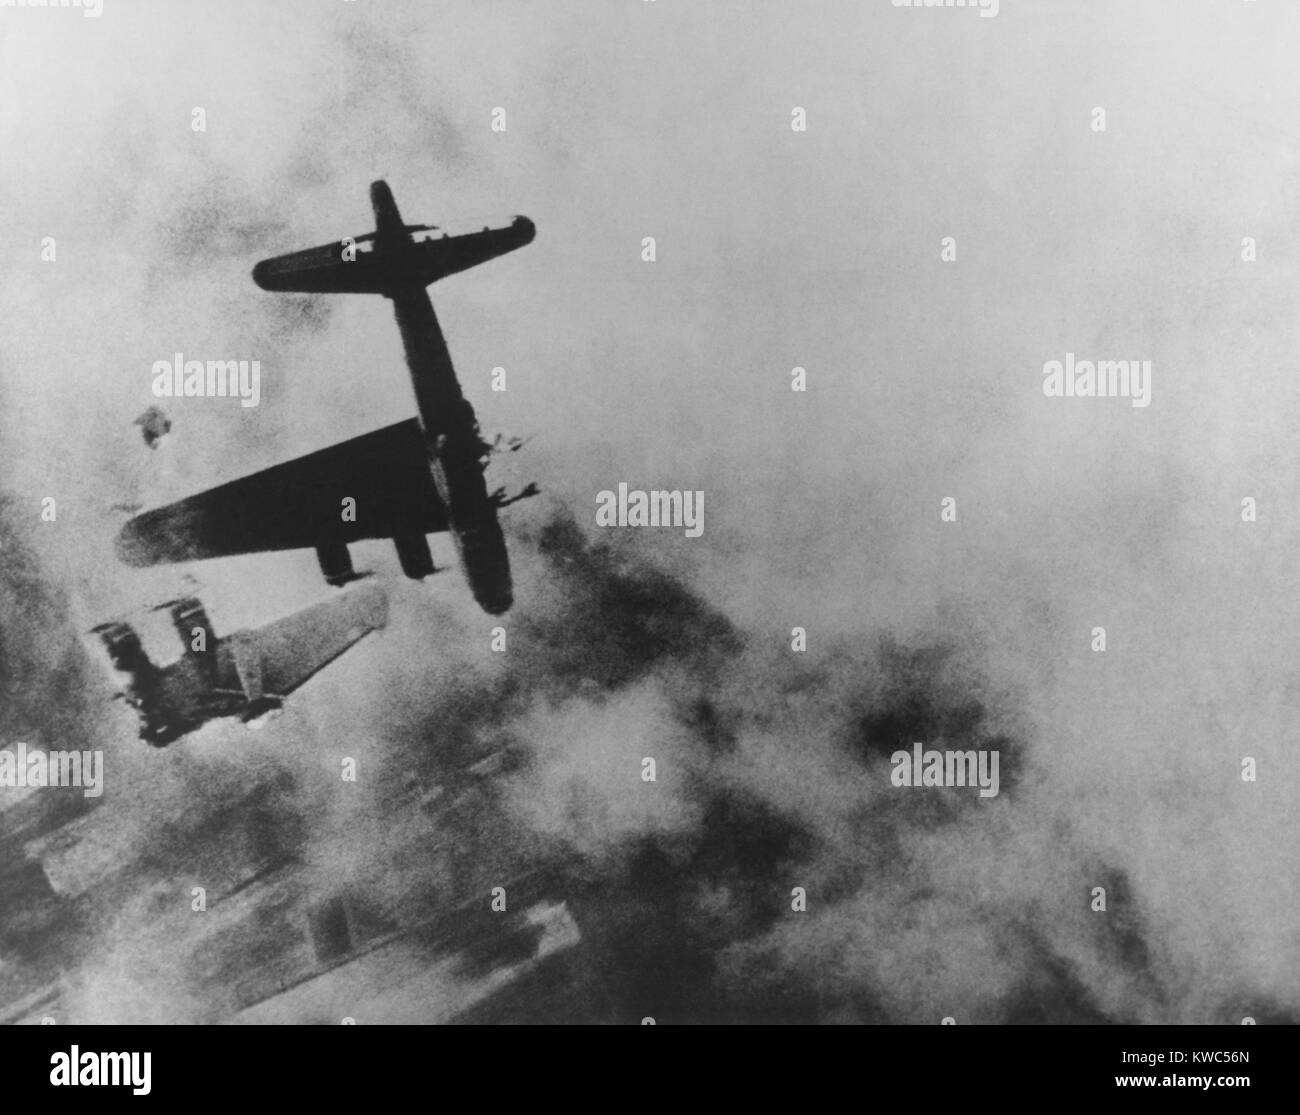 Boeing B-17G whose left wing fell off over Stendal, Germany, April 8, 1945. Named 'Wee Willie' by its crew, it was hit by anti-aircraft fire at 20,000, was burning and entered into a vertical dive, when at 5,000 feet it lost a wing. At 3000 feet it exploded. Pilot Robert E. Fuller was blown out of the plane and survived, but the rest of the crew was lost. World War 2 (BSLOC 2015 13 90) Stock Photo